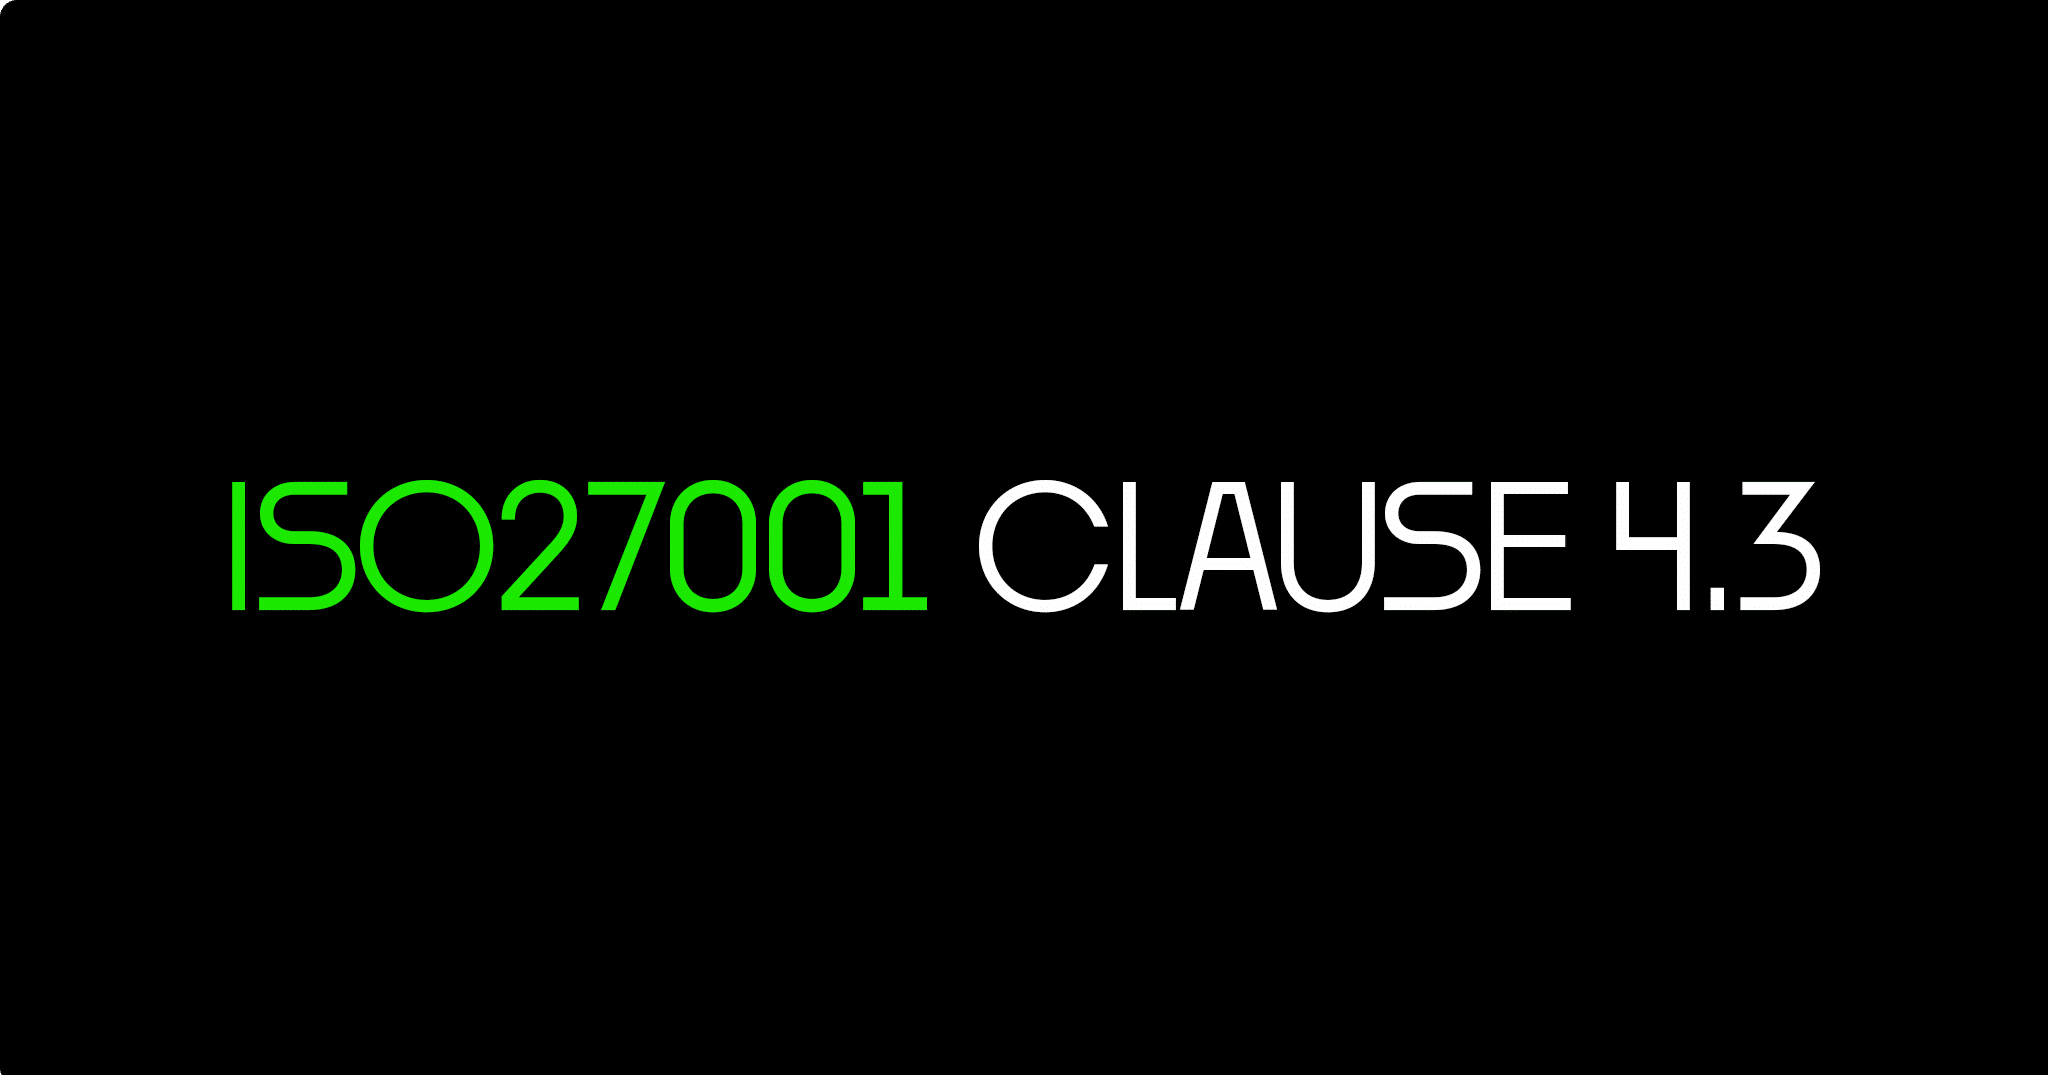 ISO 27001 Clause 4.3 Determining The Scope Of The Information Security Management System – Ultimate Certification Guide